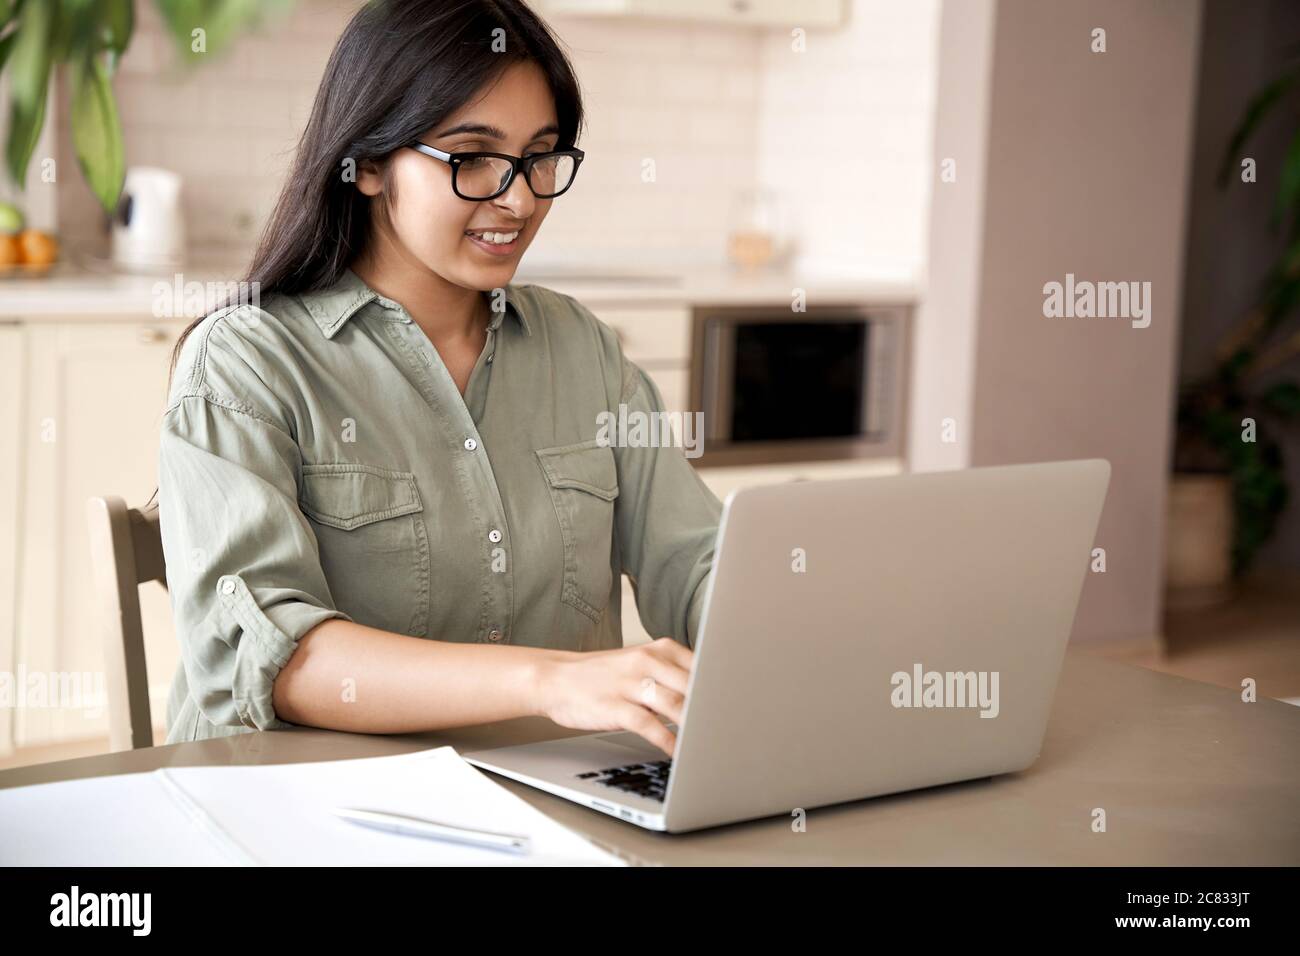 Smiling indian young woman typing on laptop computer working at home office. Stock Photo